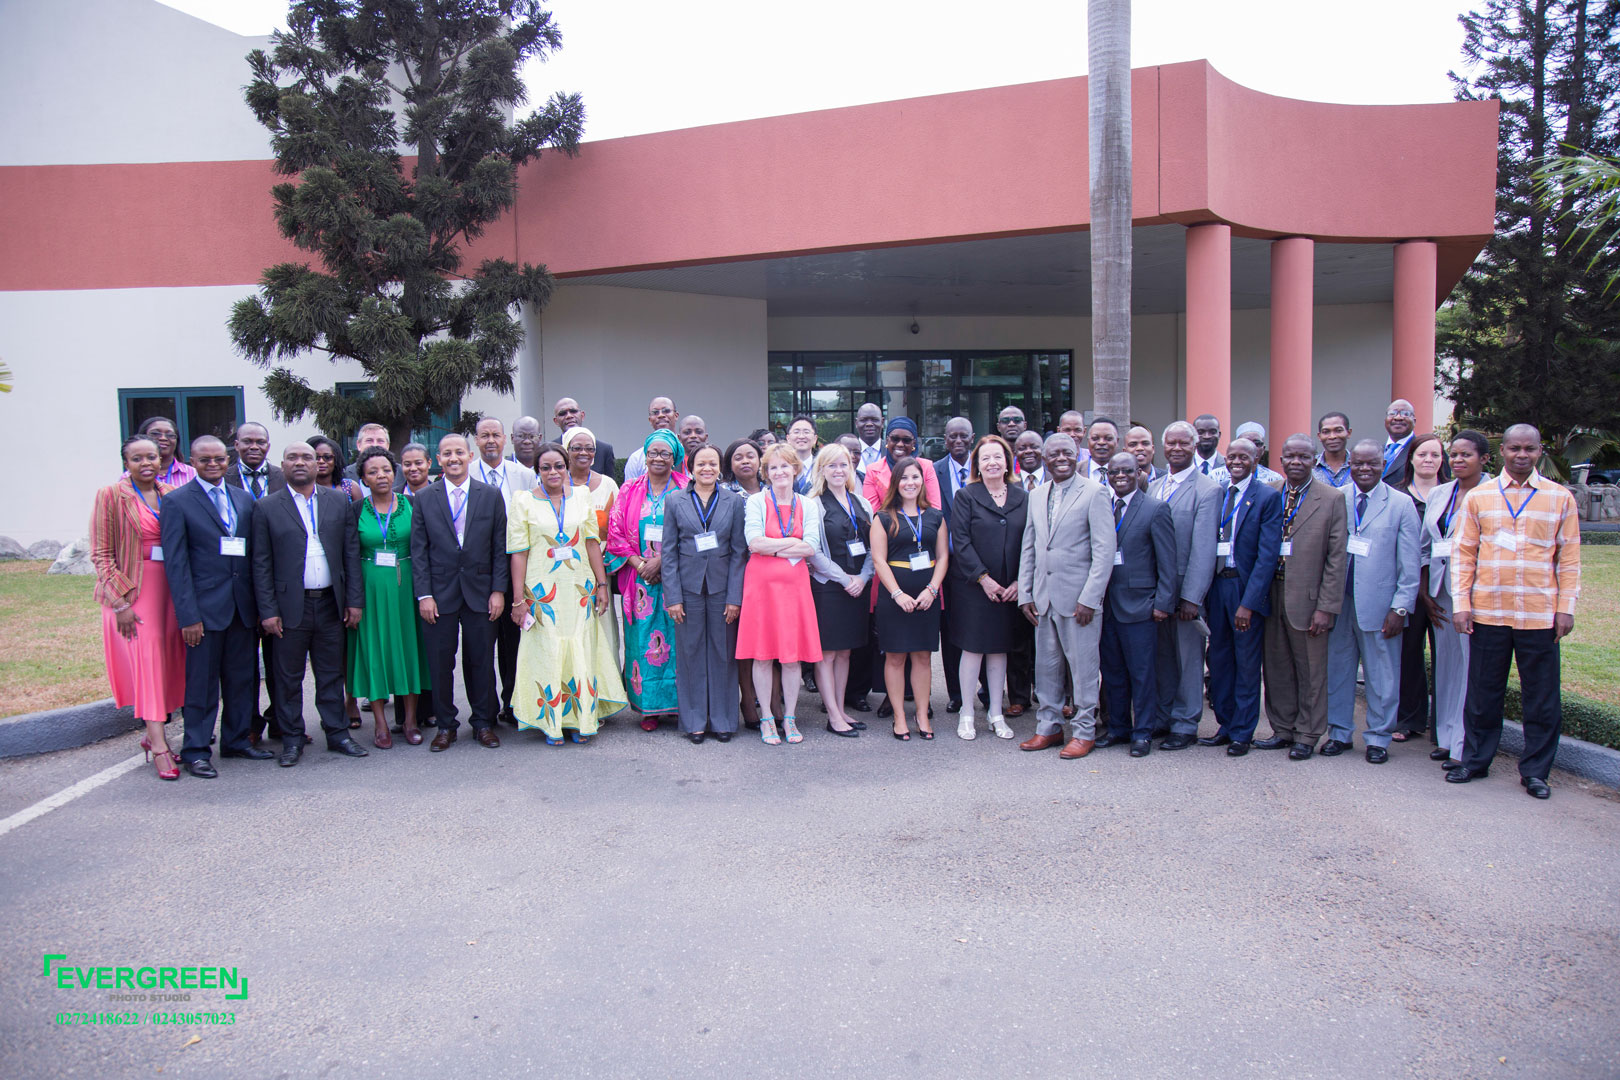 © 2015 AU-IBAR/Evergreen. Group photo of Participants